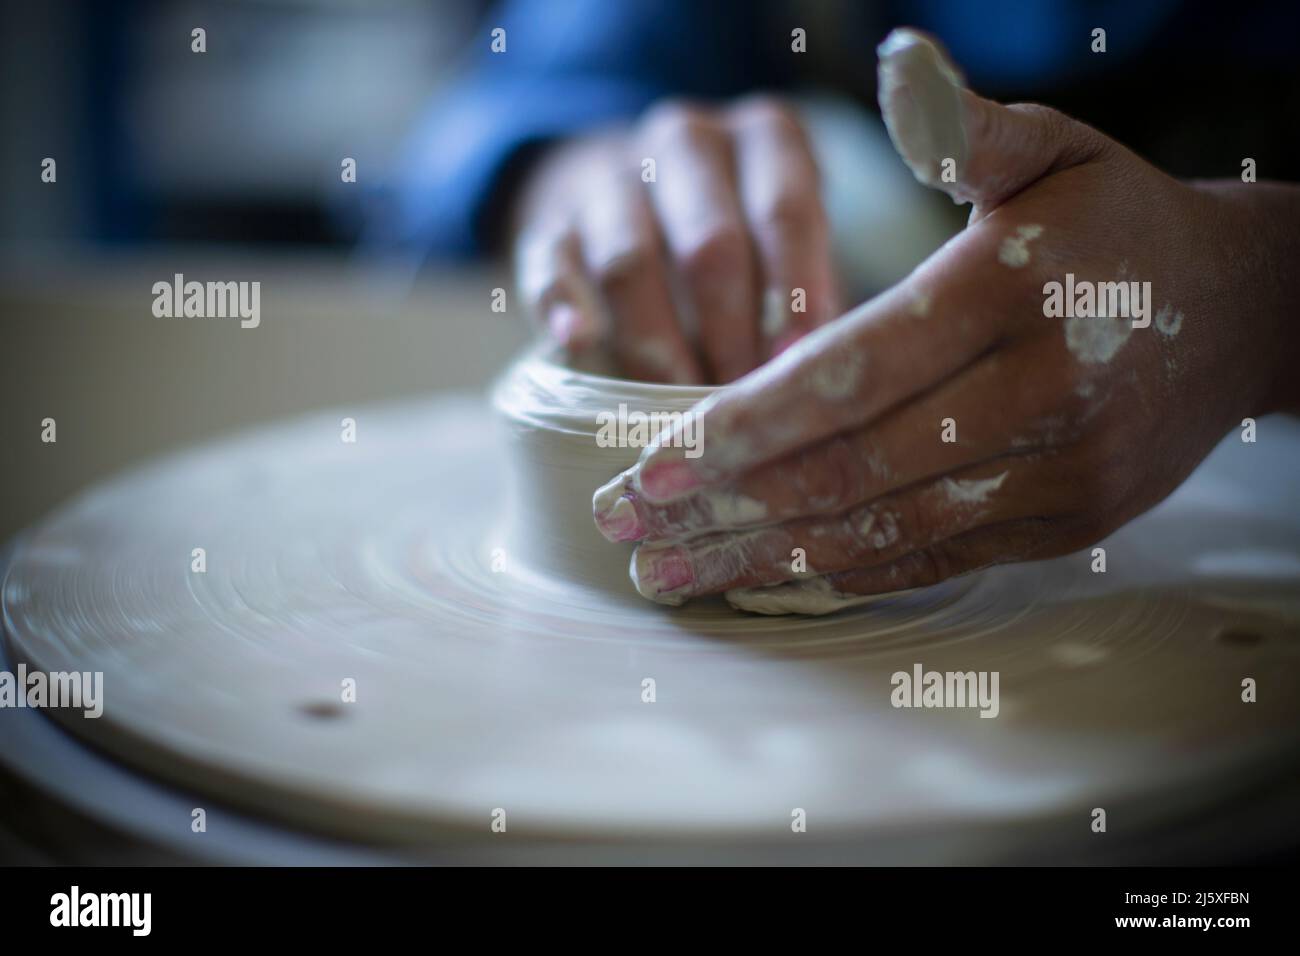 Close up hands of woman using pottery wheel Stock Photo